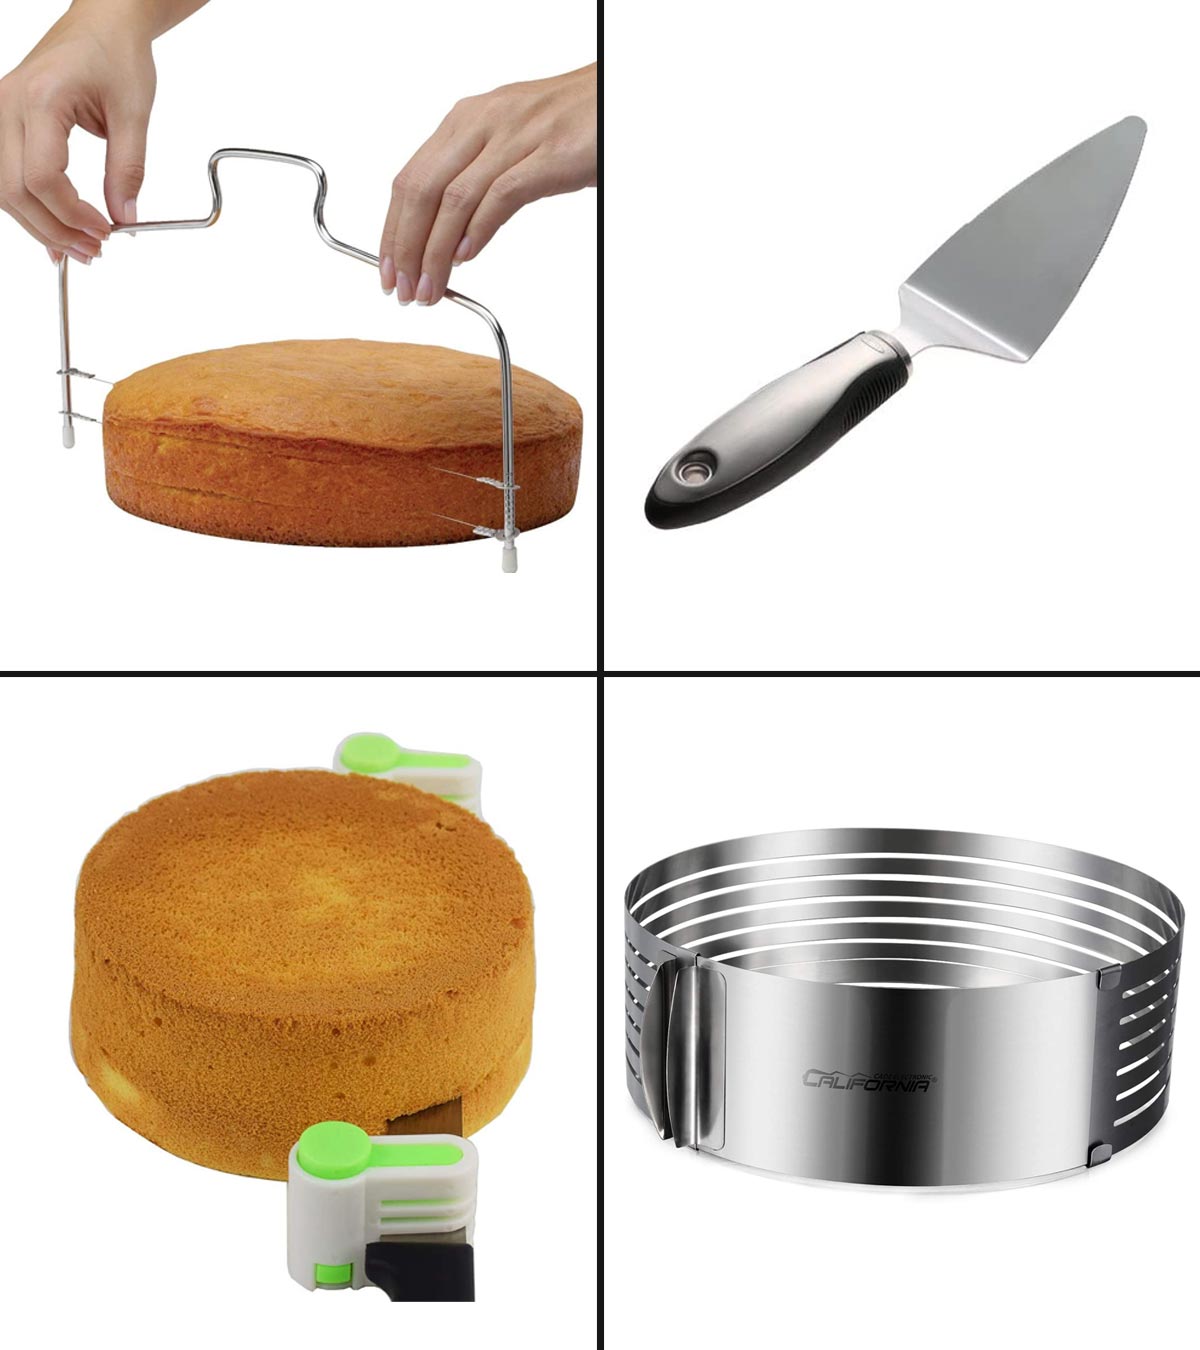 Anti Slip Handle Best Kitchen Pizza/Cake Slicer,Edible Level pushable Pizza/Cake Scoop with Extended Handle Non Stick and Easy to Use,Lightweight 